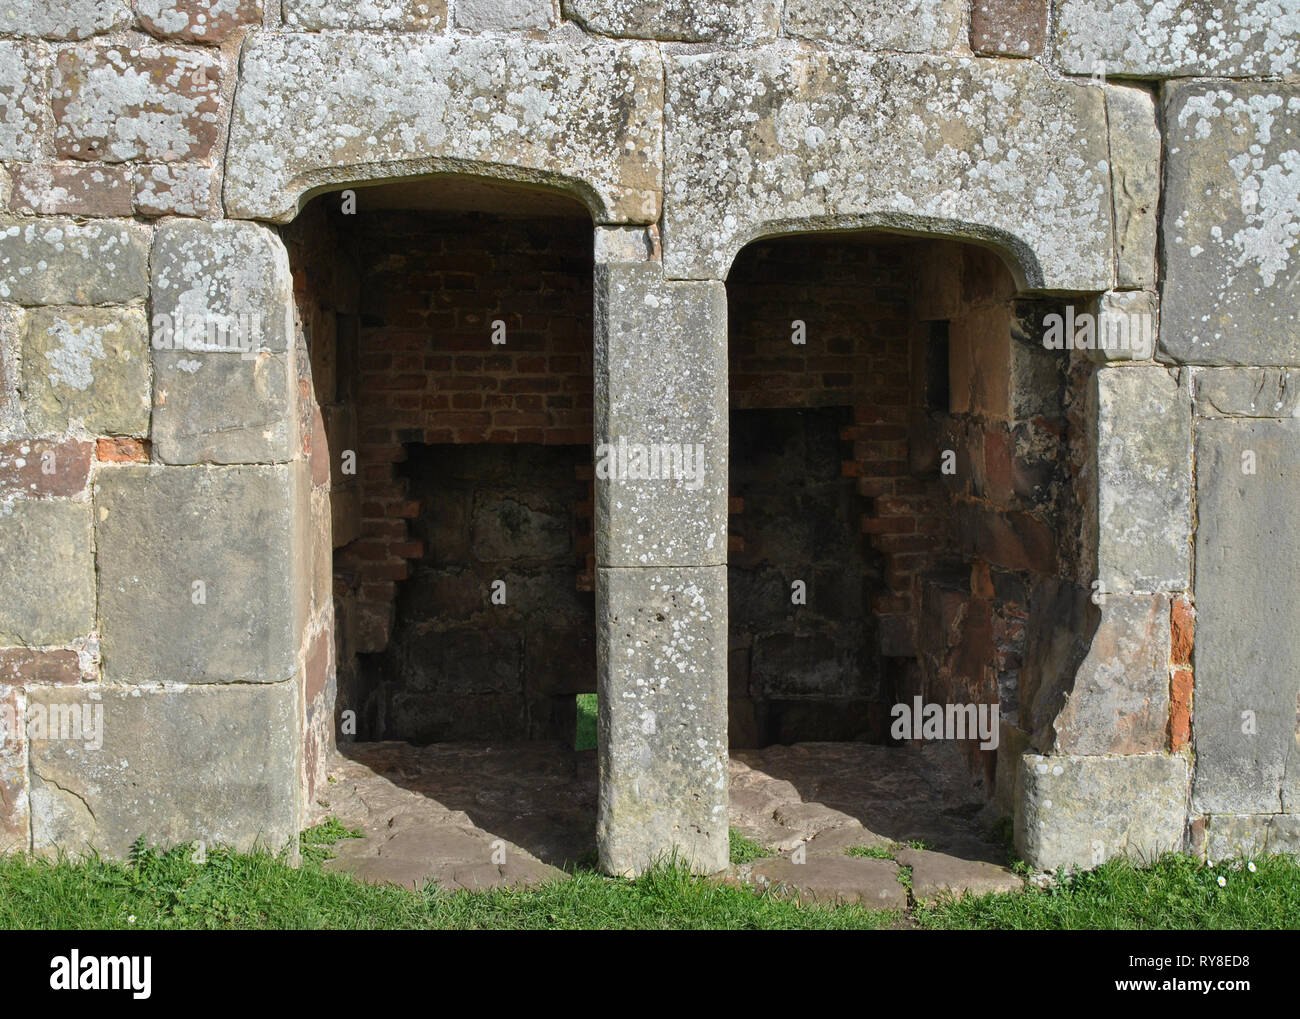 Two stone archways built into an old wall Stock Photo